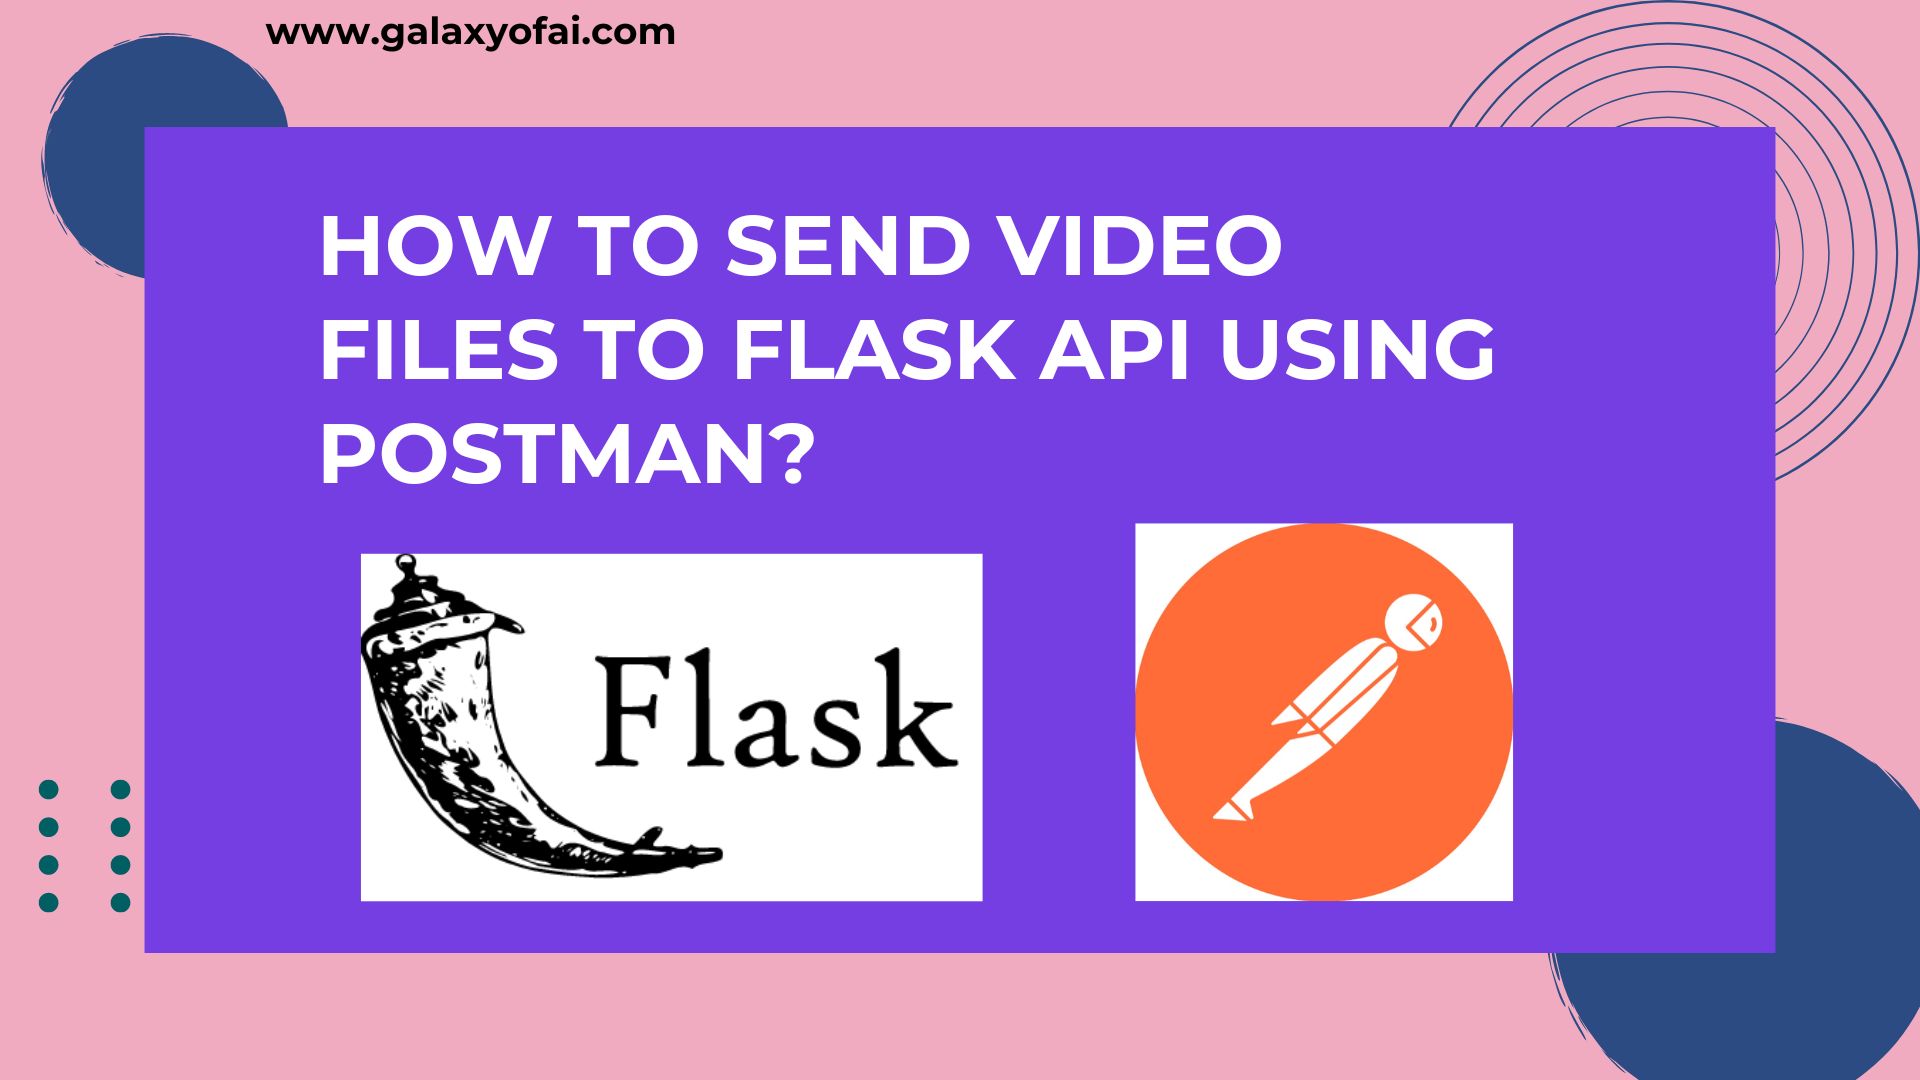 How To Send Video Files To Flask API Using Postman?